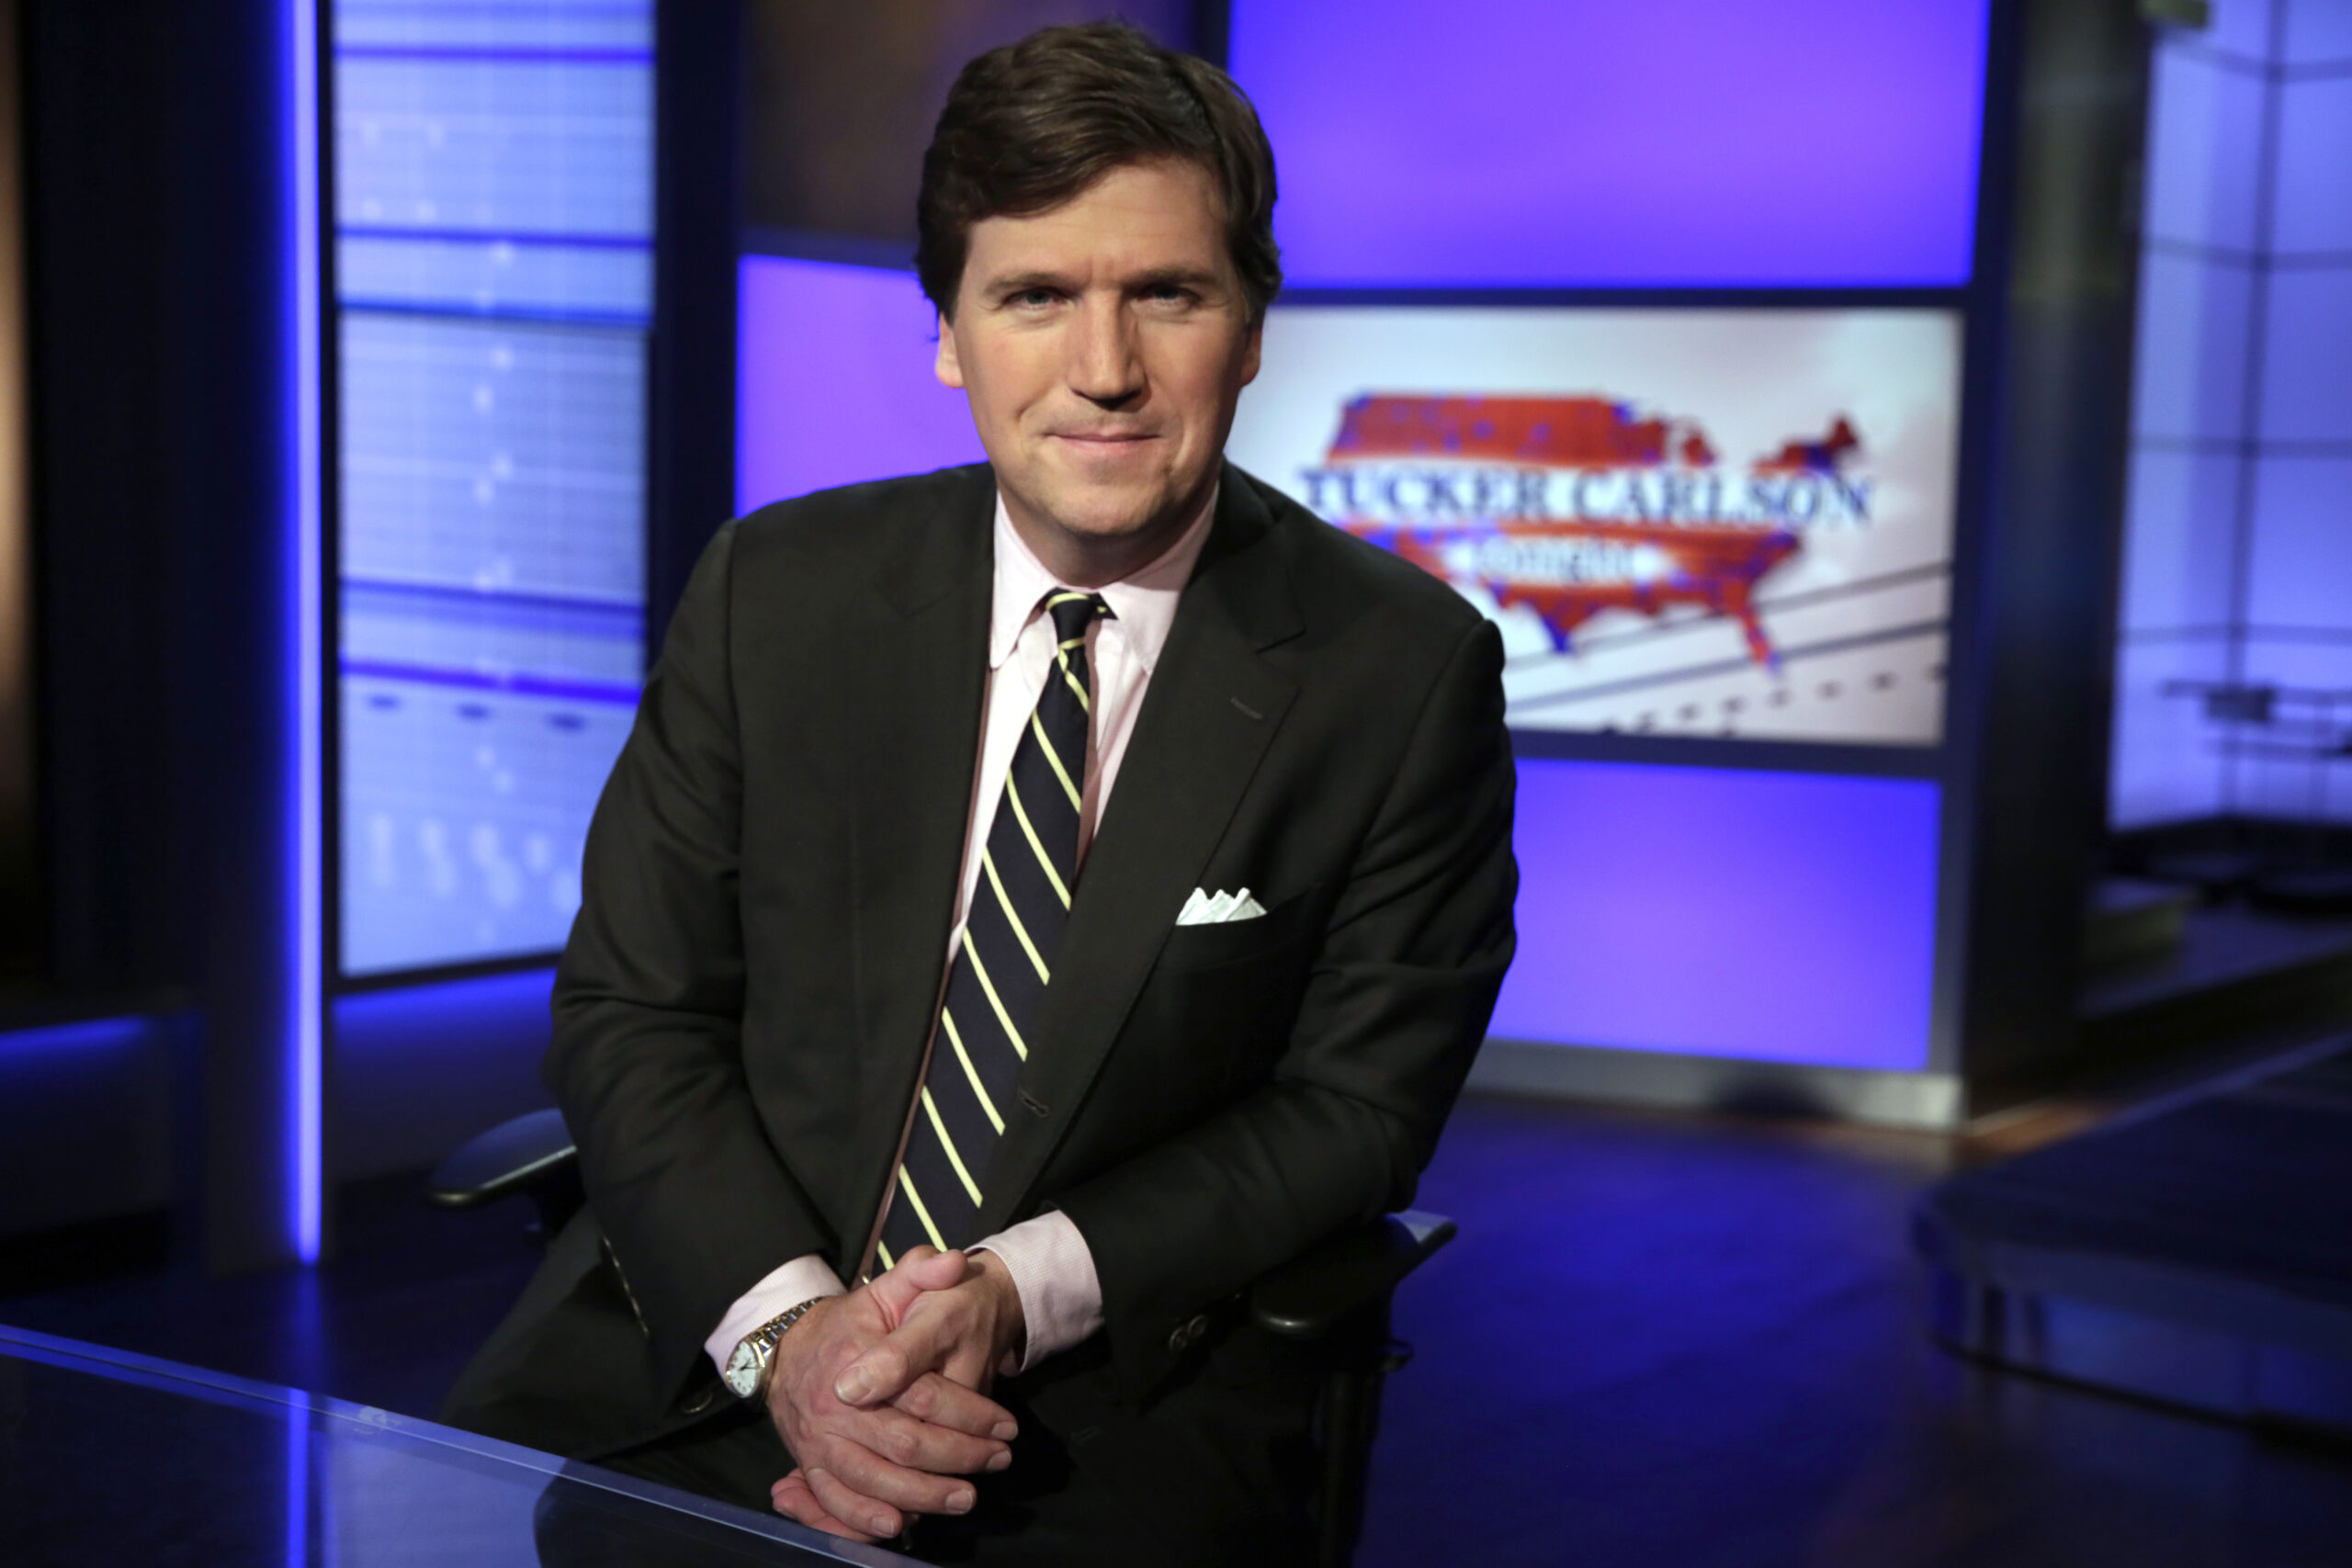 FILE - In this Thursday, March 2, 2107 file photo, Tucker Carlson, host of "Tucker Carlson Tonight," poses for a photo in a Fox News Channel studio in New York. The Anti-Defamation League has called for Fox News to fire prime-time opinion host Tucker Carlson because he defended a white-supremacist theory that says whites are being “replaced” by people of color. In a letter to Fox News CEO Suzanne Scott on Friday, April 9, 2021the head of the ADL, Jonathan Greenblatt, said Carlson's “rhetoric was not just a dog whistle to racists — it was a bullhorn.” (AP Photo/Richard Drew, File)